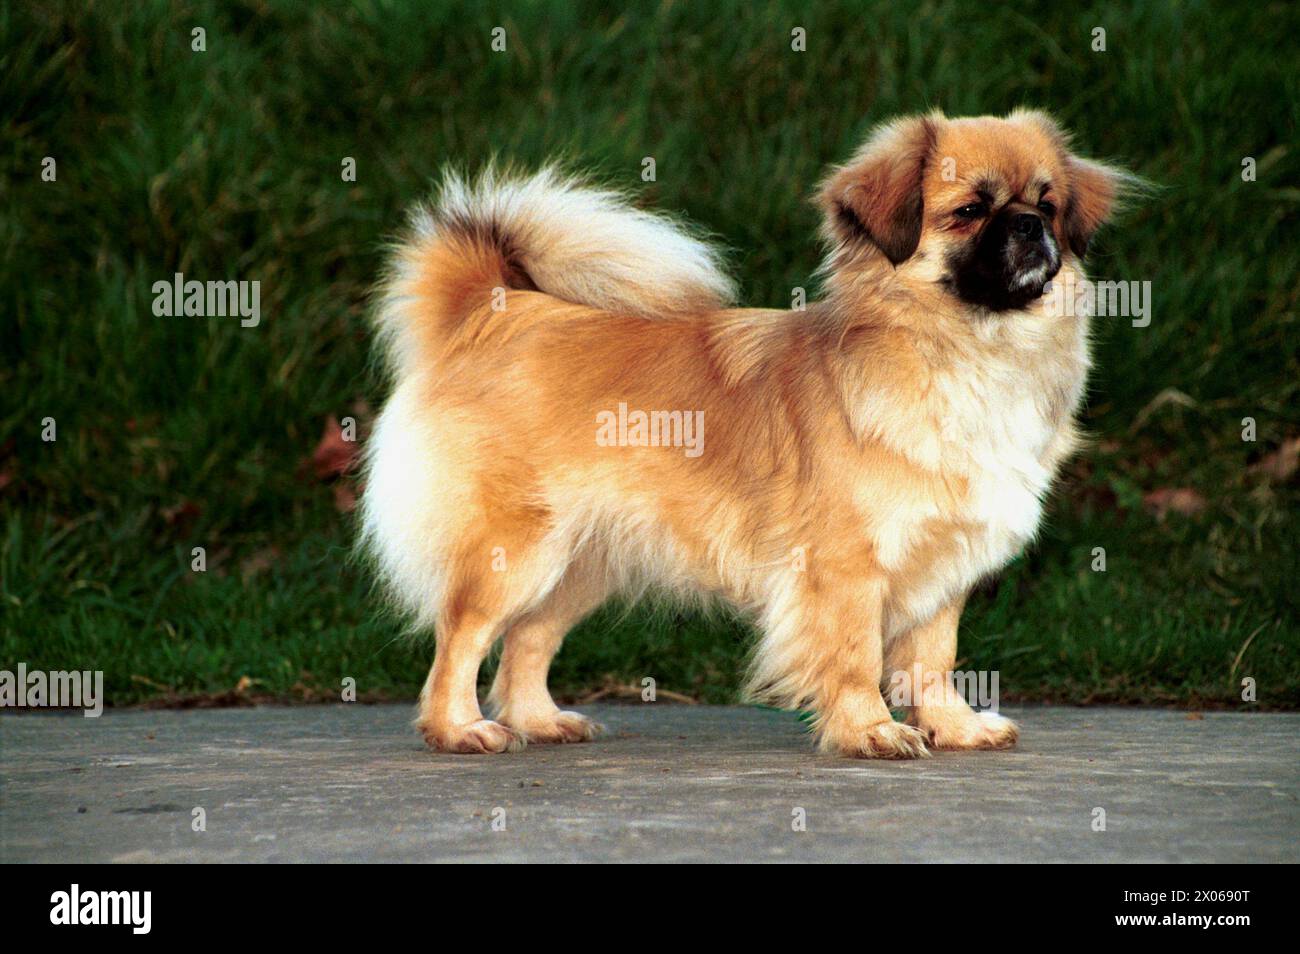 Tibetan Spaniel Cream Dog Side View on Path in front of Greenery Stock Photo